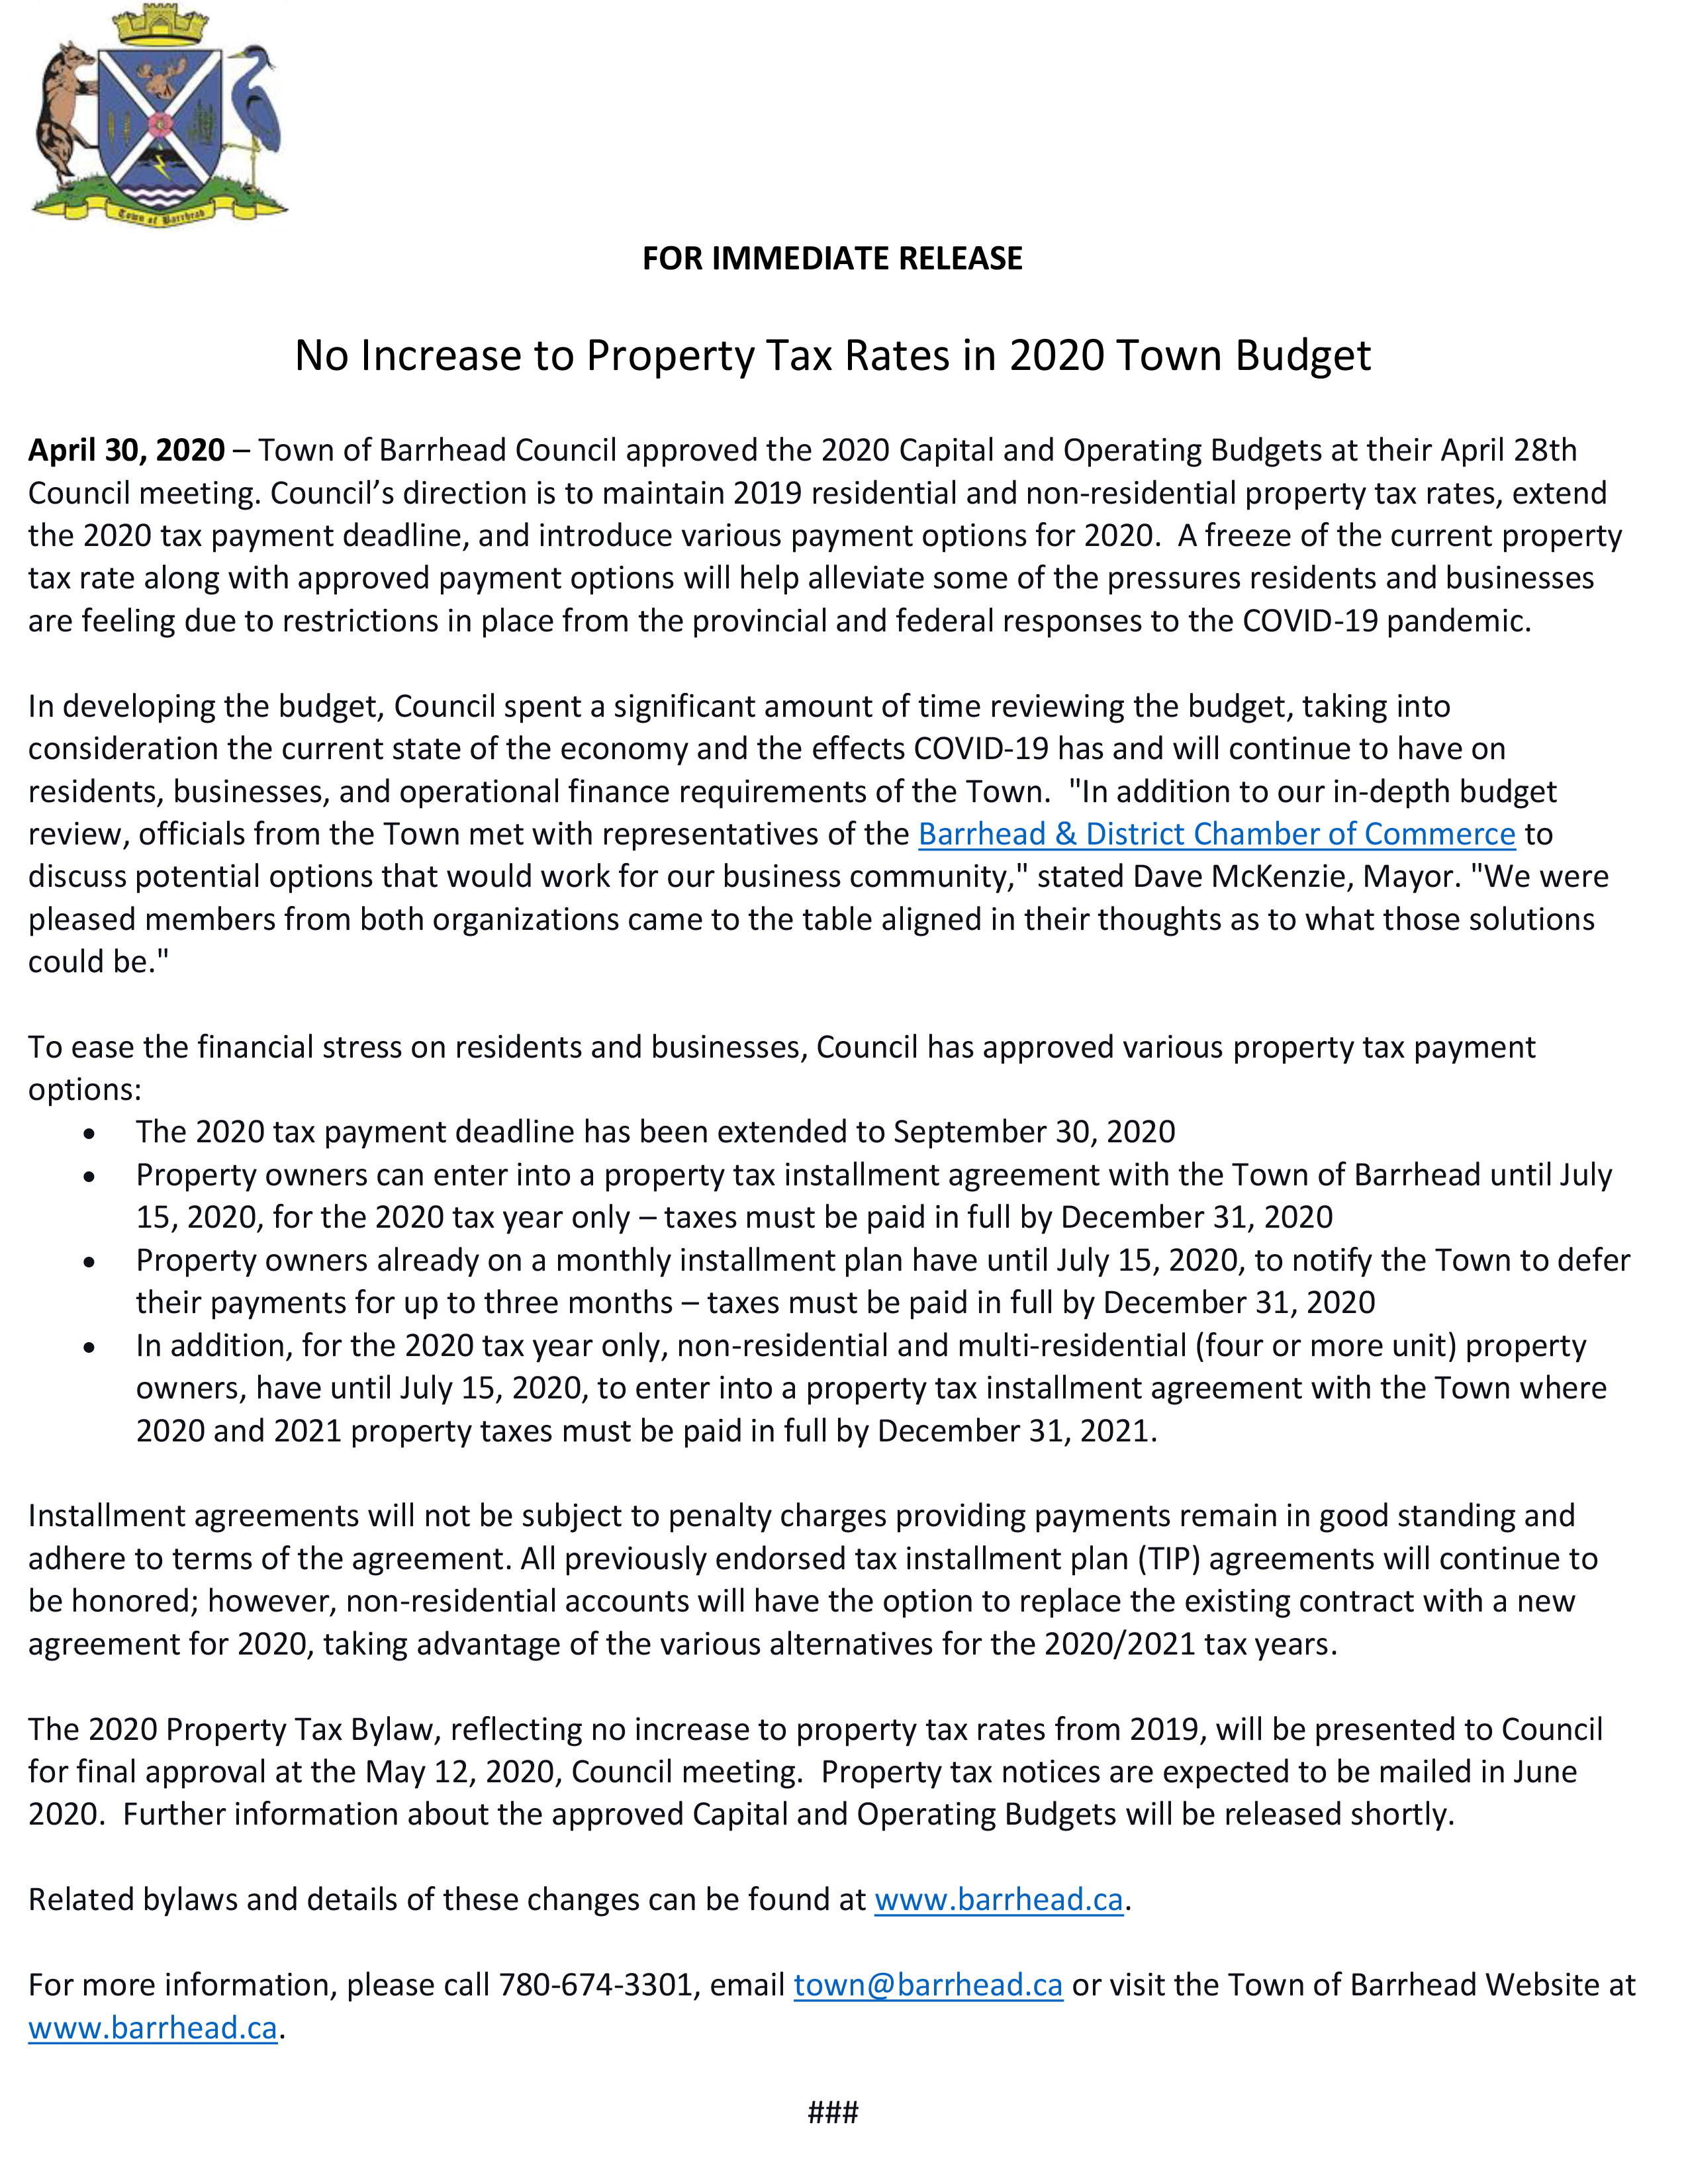 Property Taxes in 2020